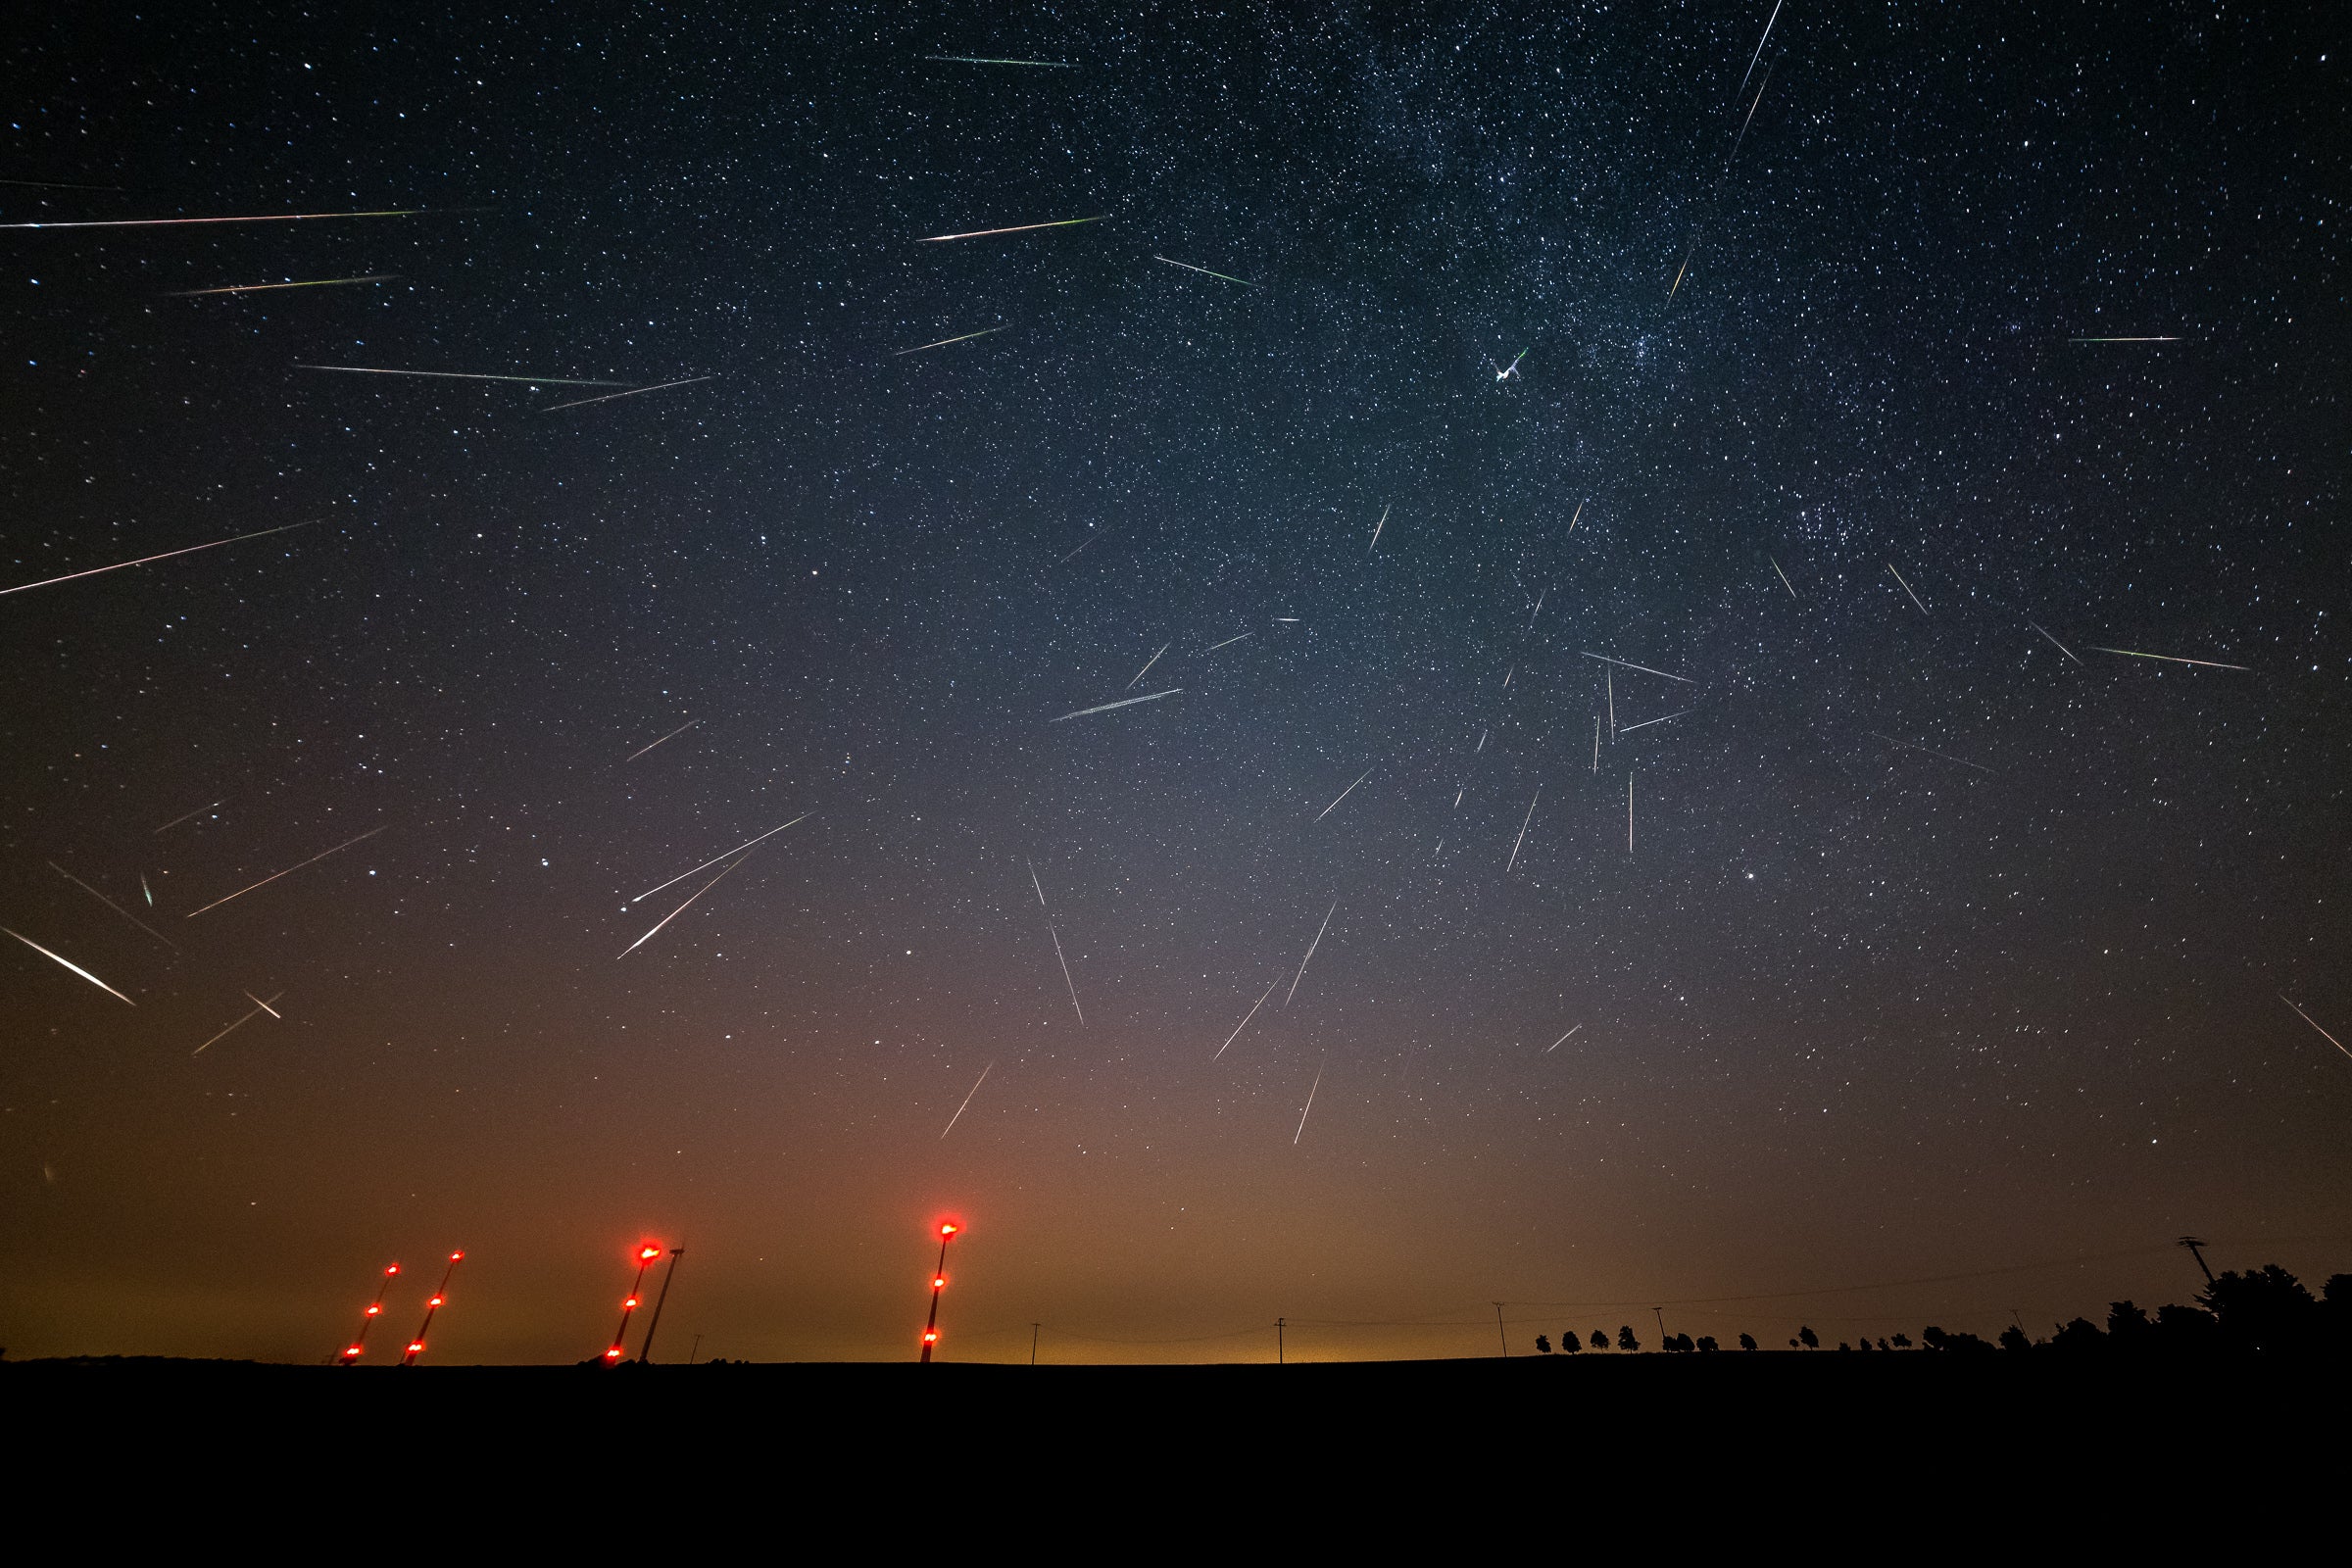 Lights fantastic: Meteors rain down from the sky